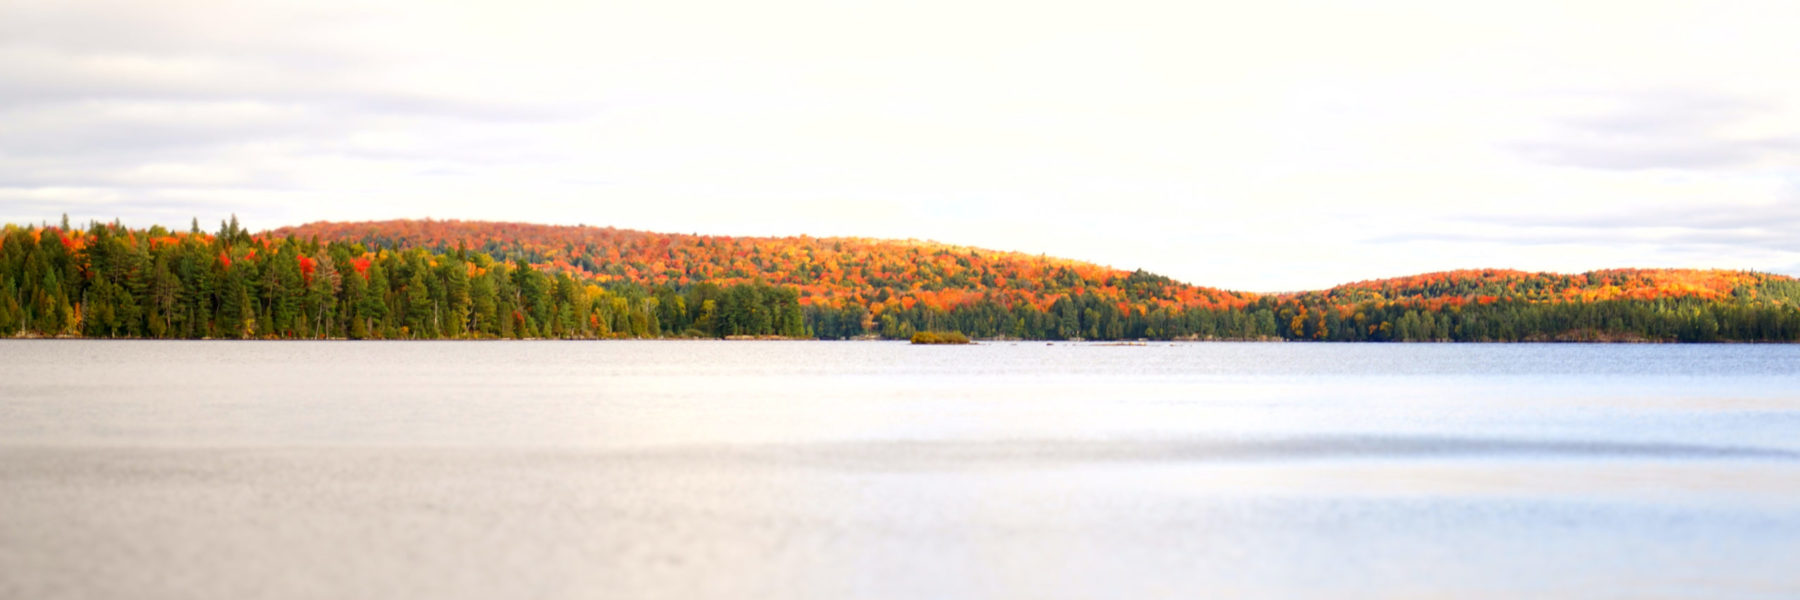 Ontario lake near forest displaying fall colours